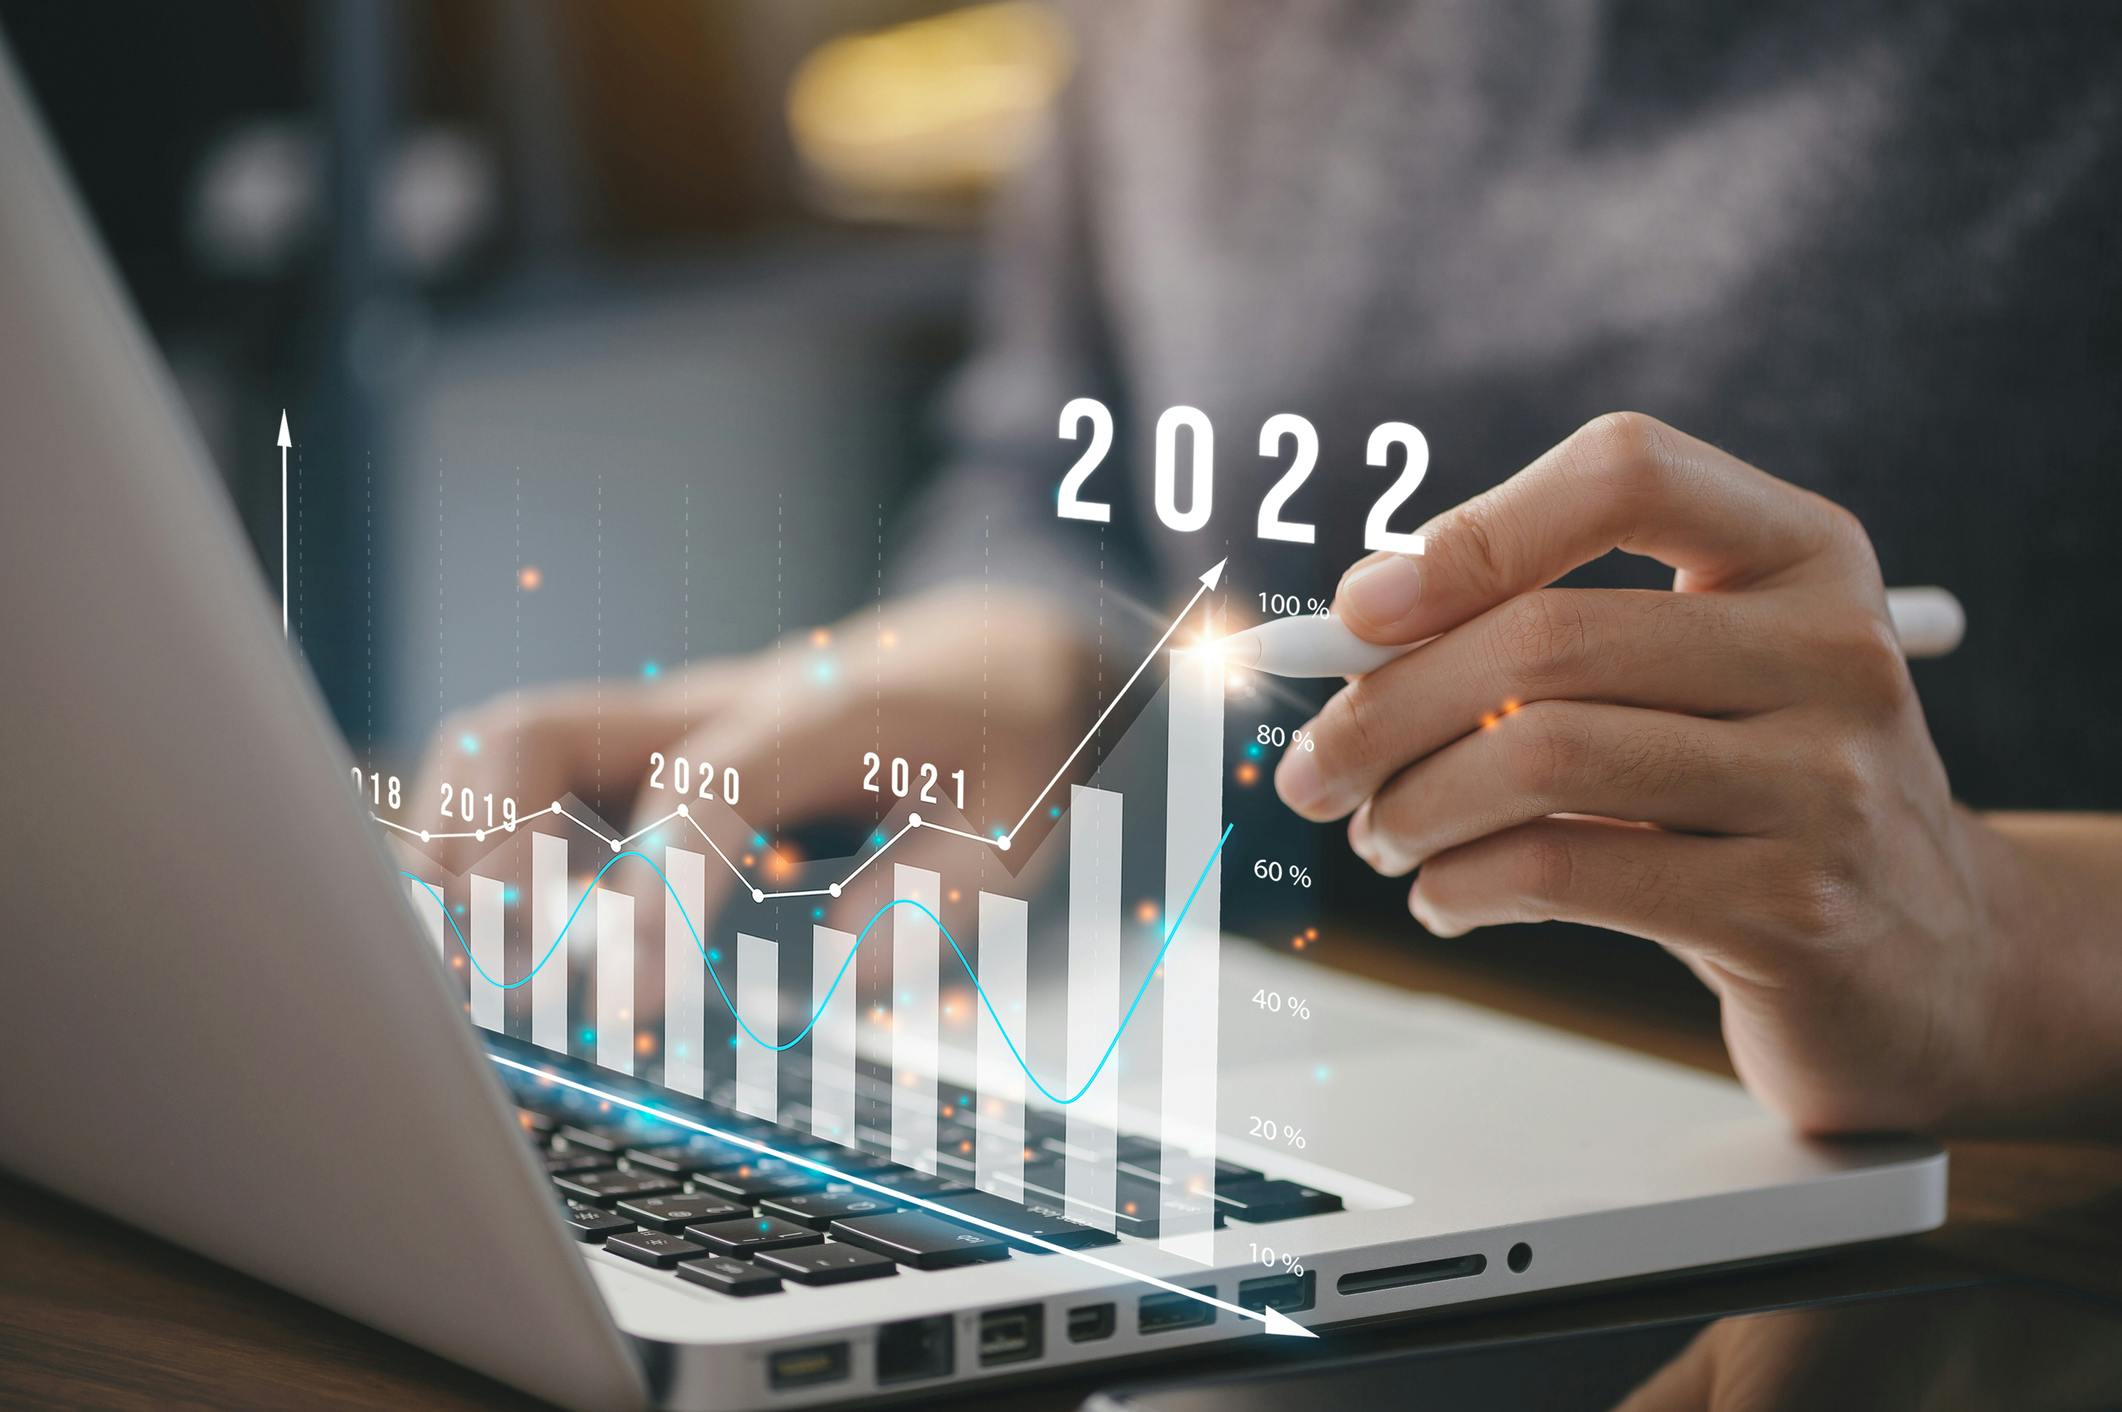 A Look Into the Gartner Top Business Trends Impacting Higher Education in 2022